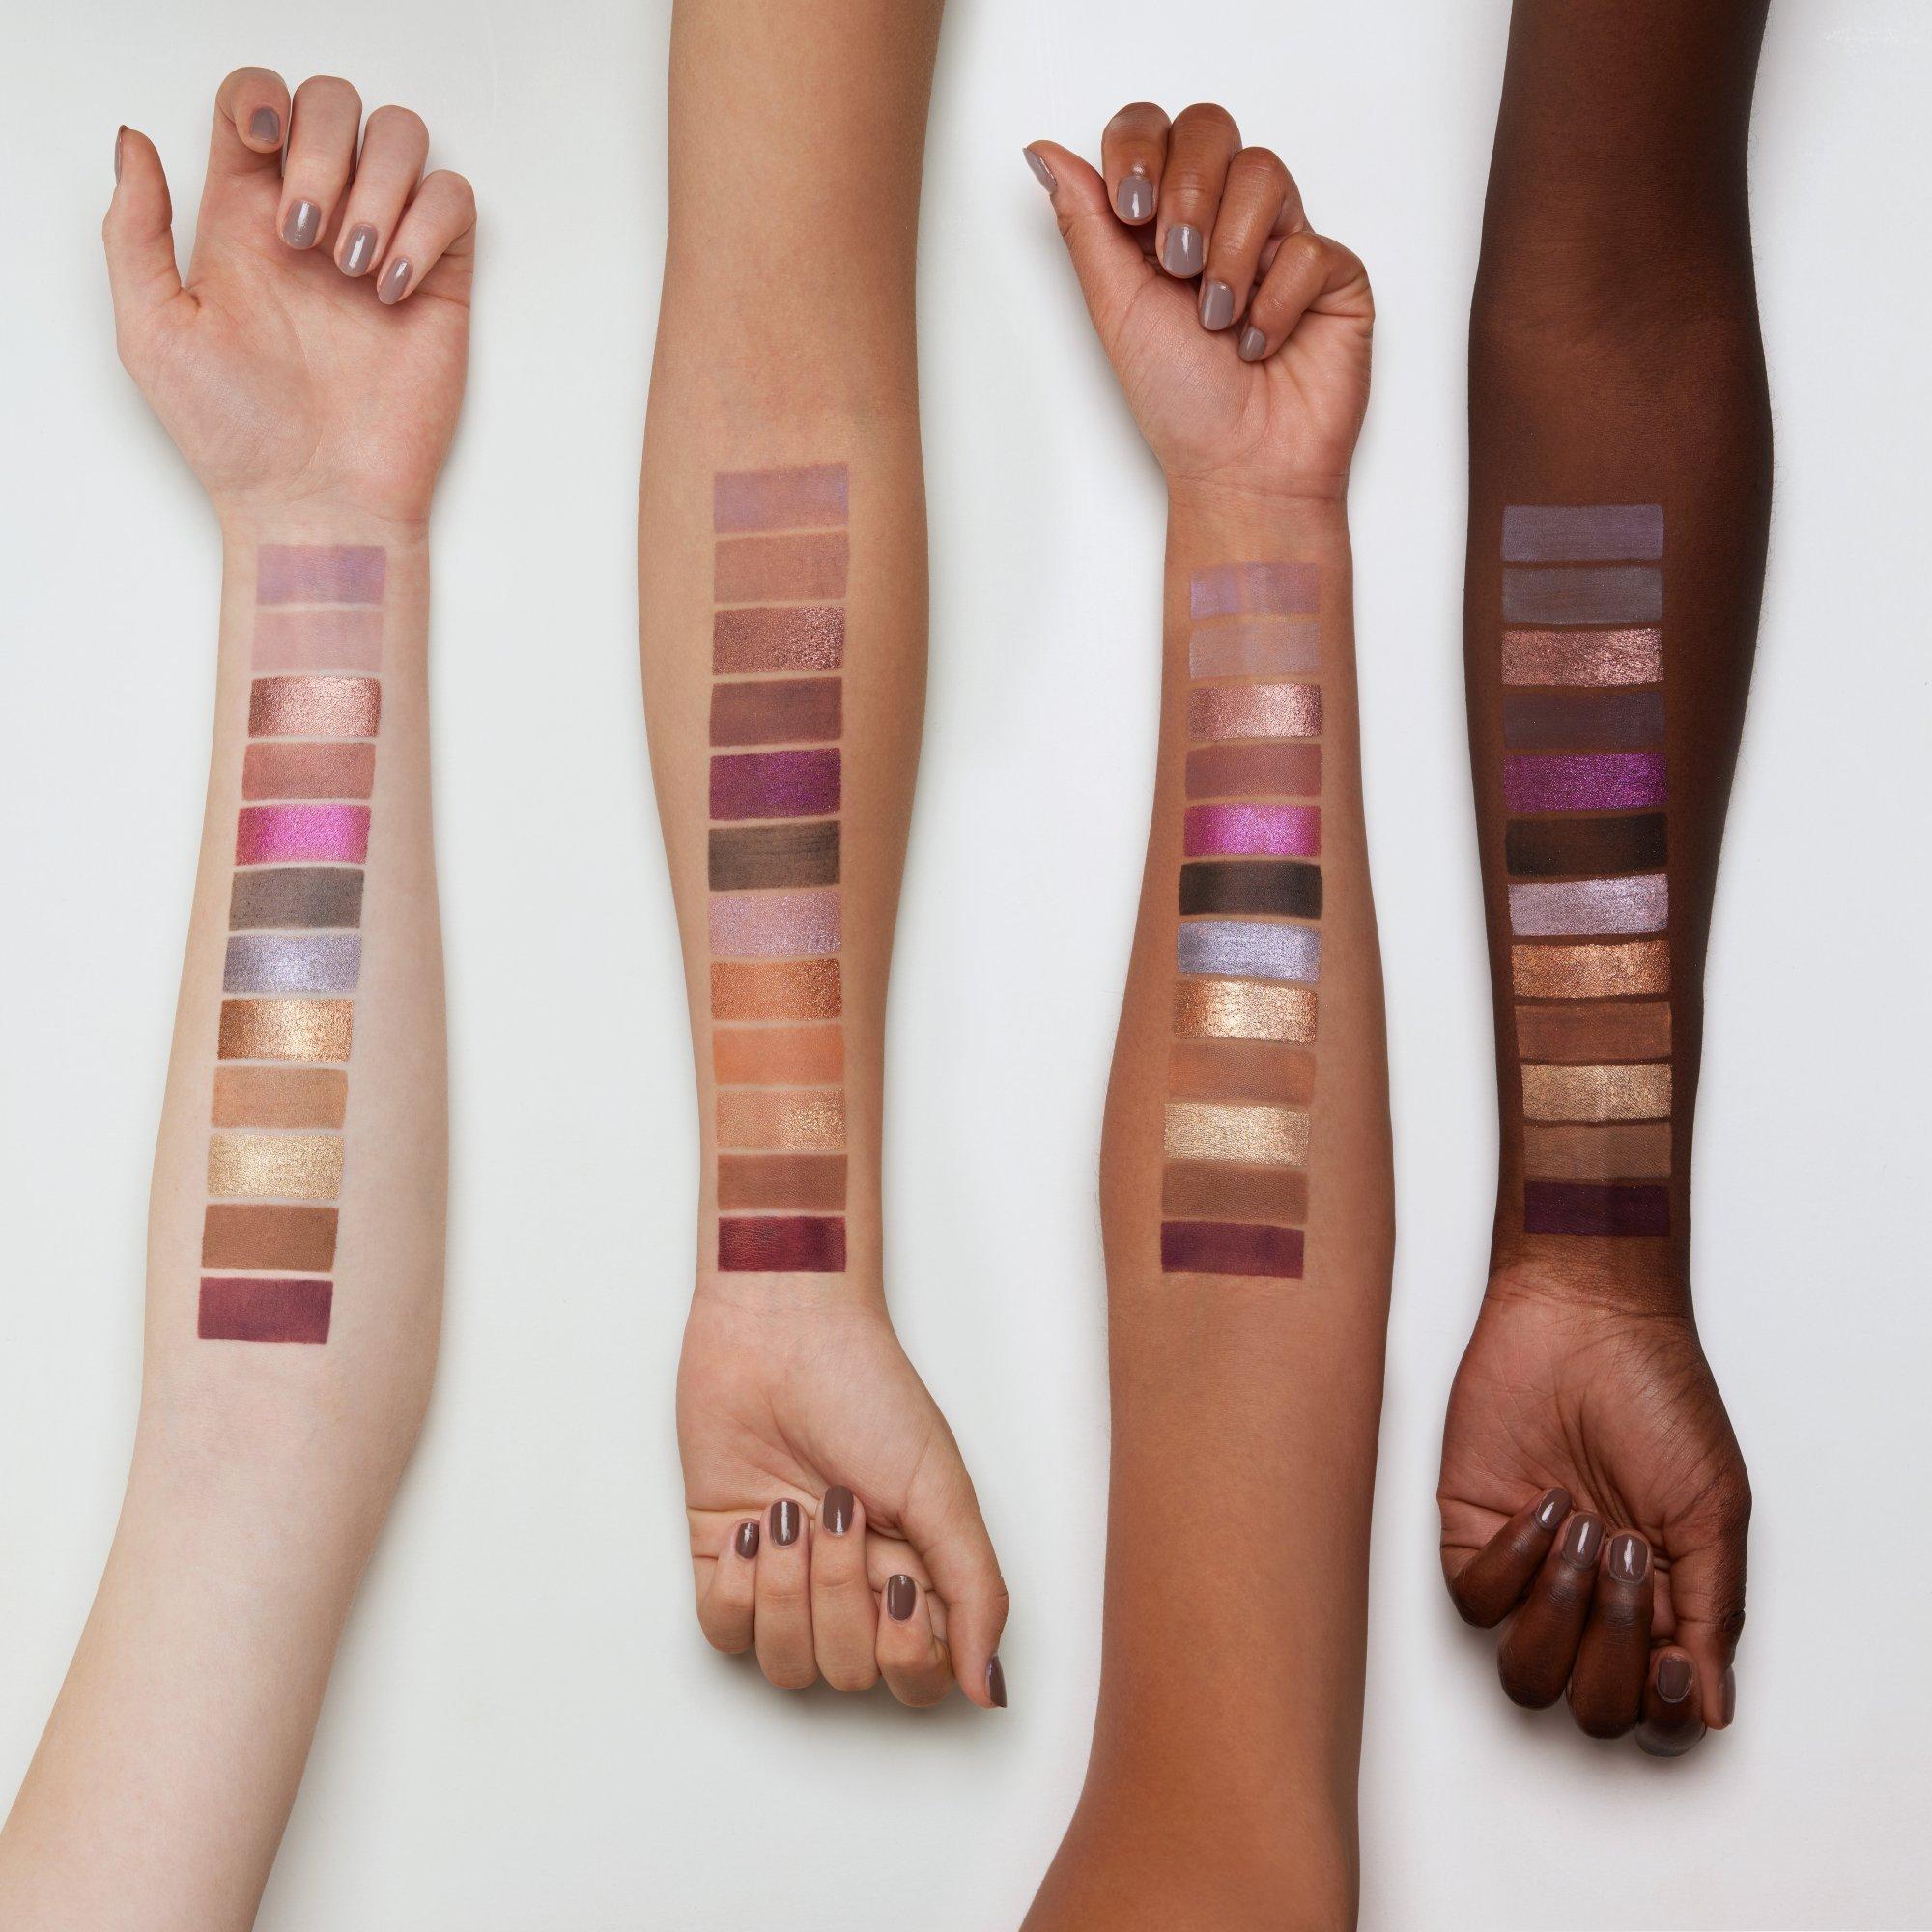 welcome to MARRAKESH eyeshadow palette